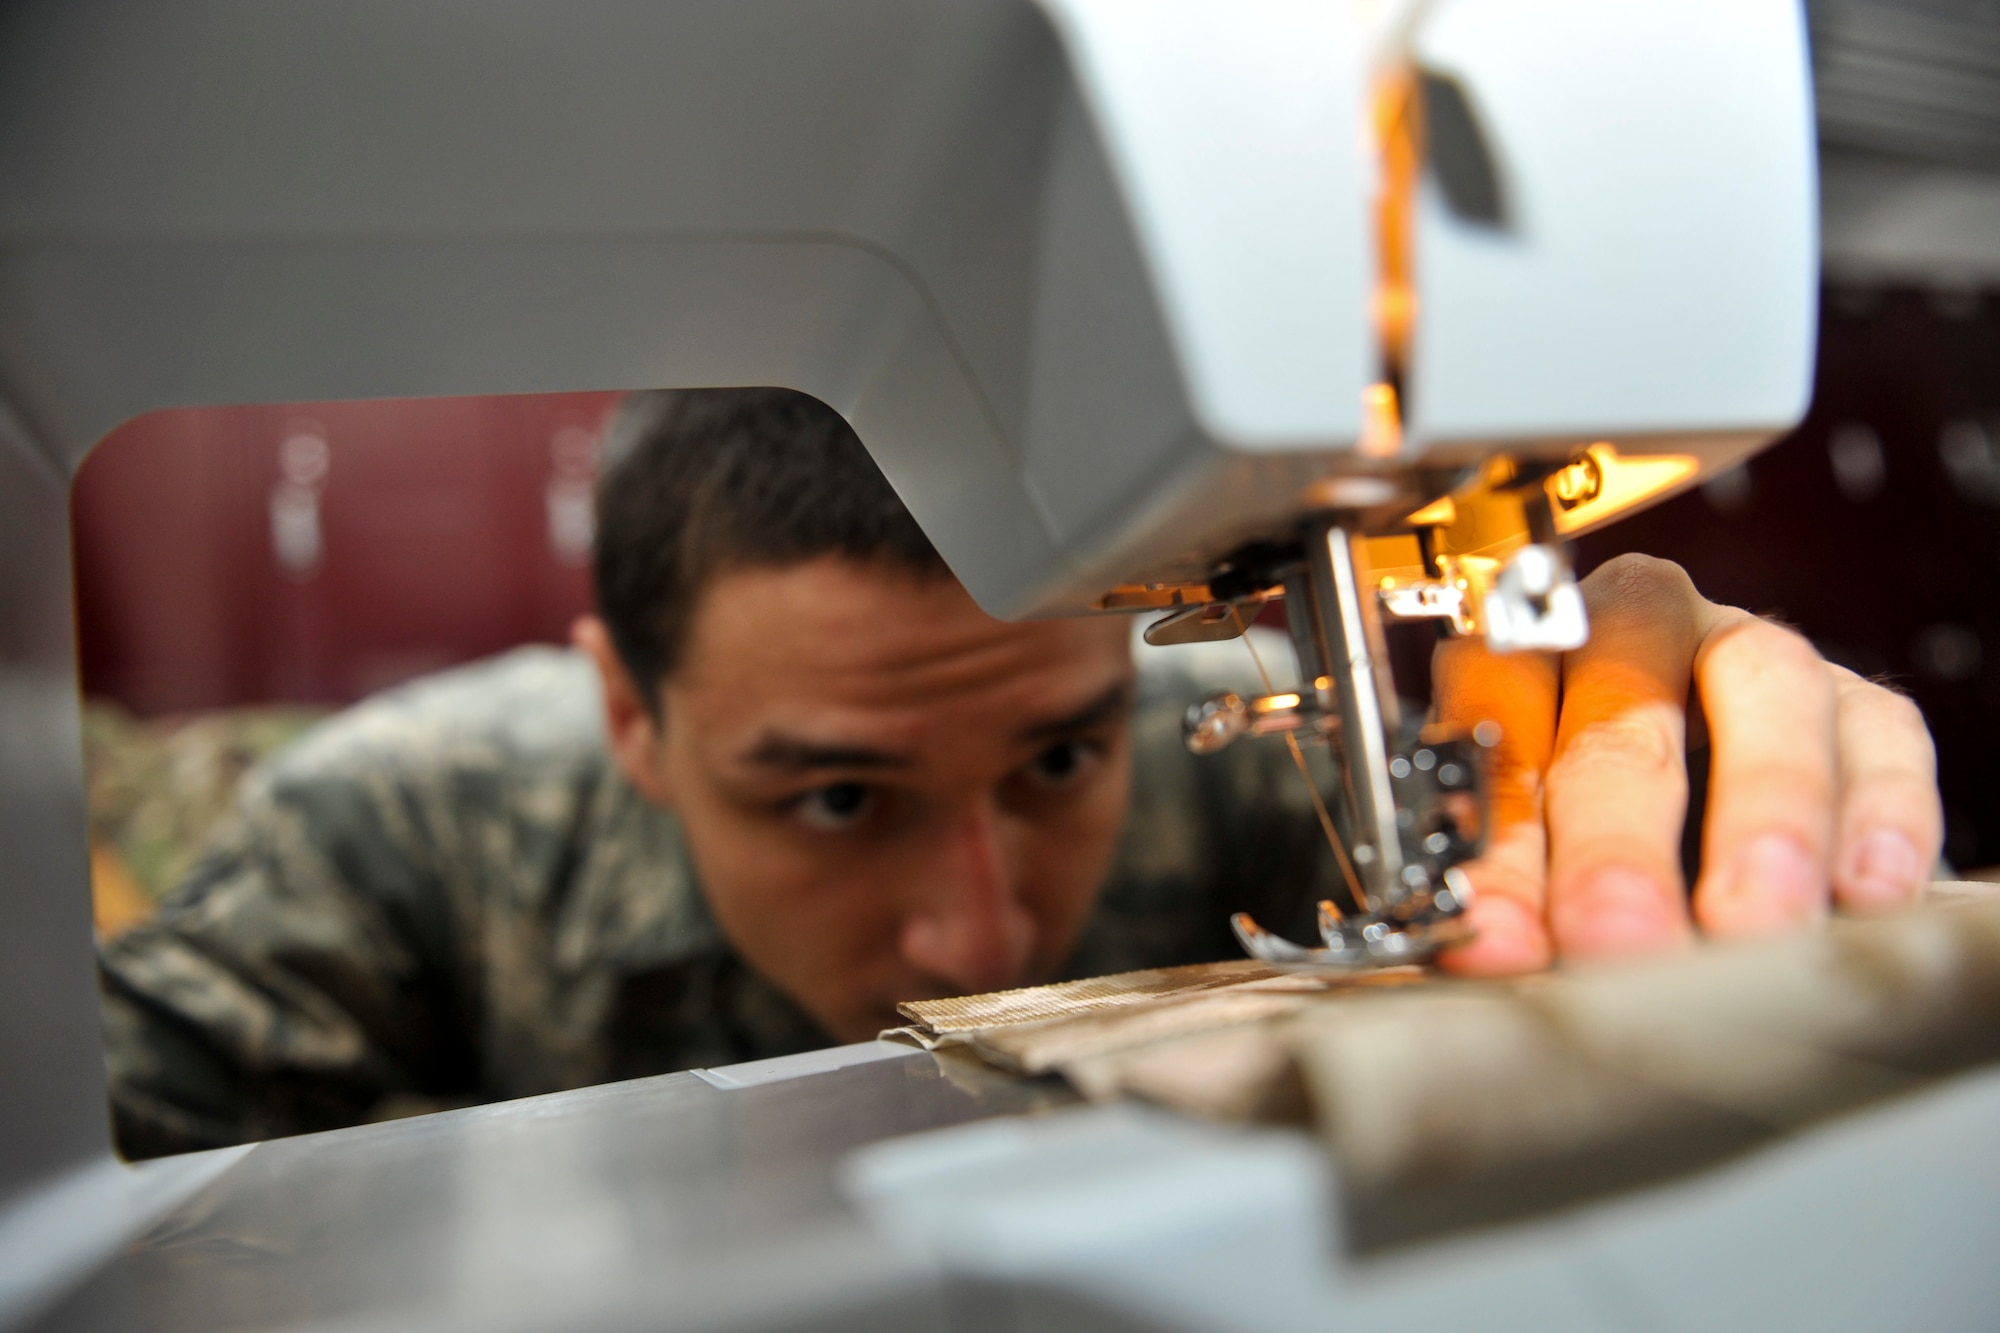 Senior Airman Devin Litton, 22nd Operations Support Squadron aircrew flight equipment journeyman, uses a sewing machine, July 18, 2014, at McConnell Air Force Base, Kan. Sewing is one of several skills an AFE Airmen must be proficient with for repairing life rafts and other emergency components. (U.S. Air Force photo/Airman 1st Class John Linzmeier)